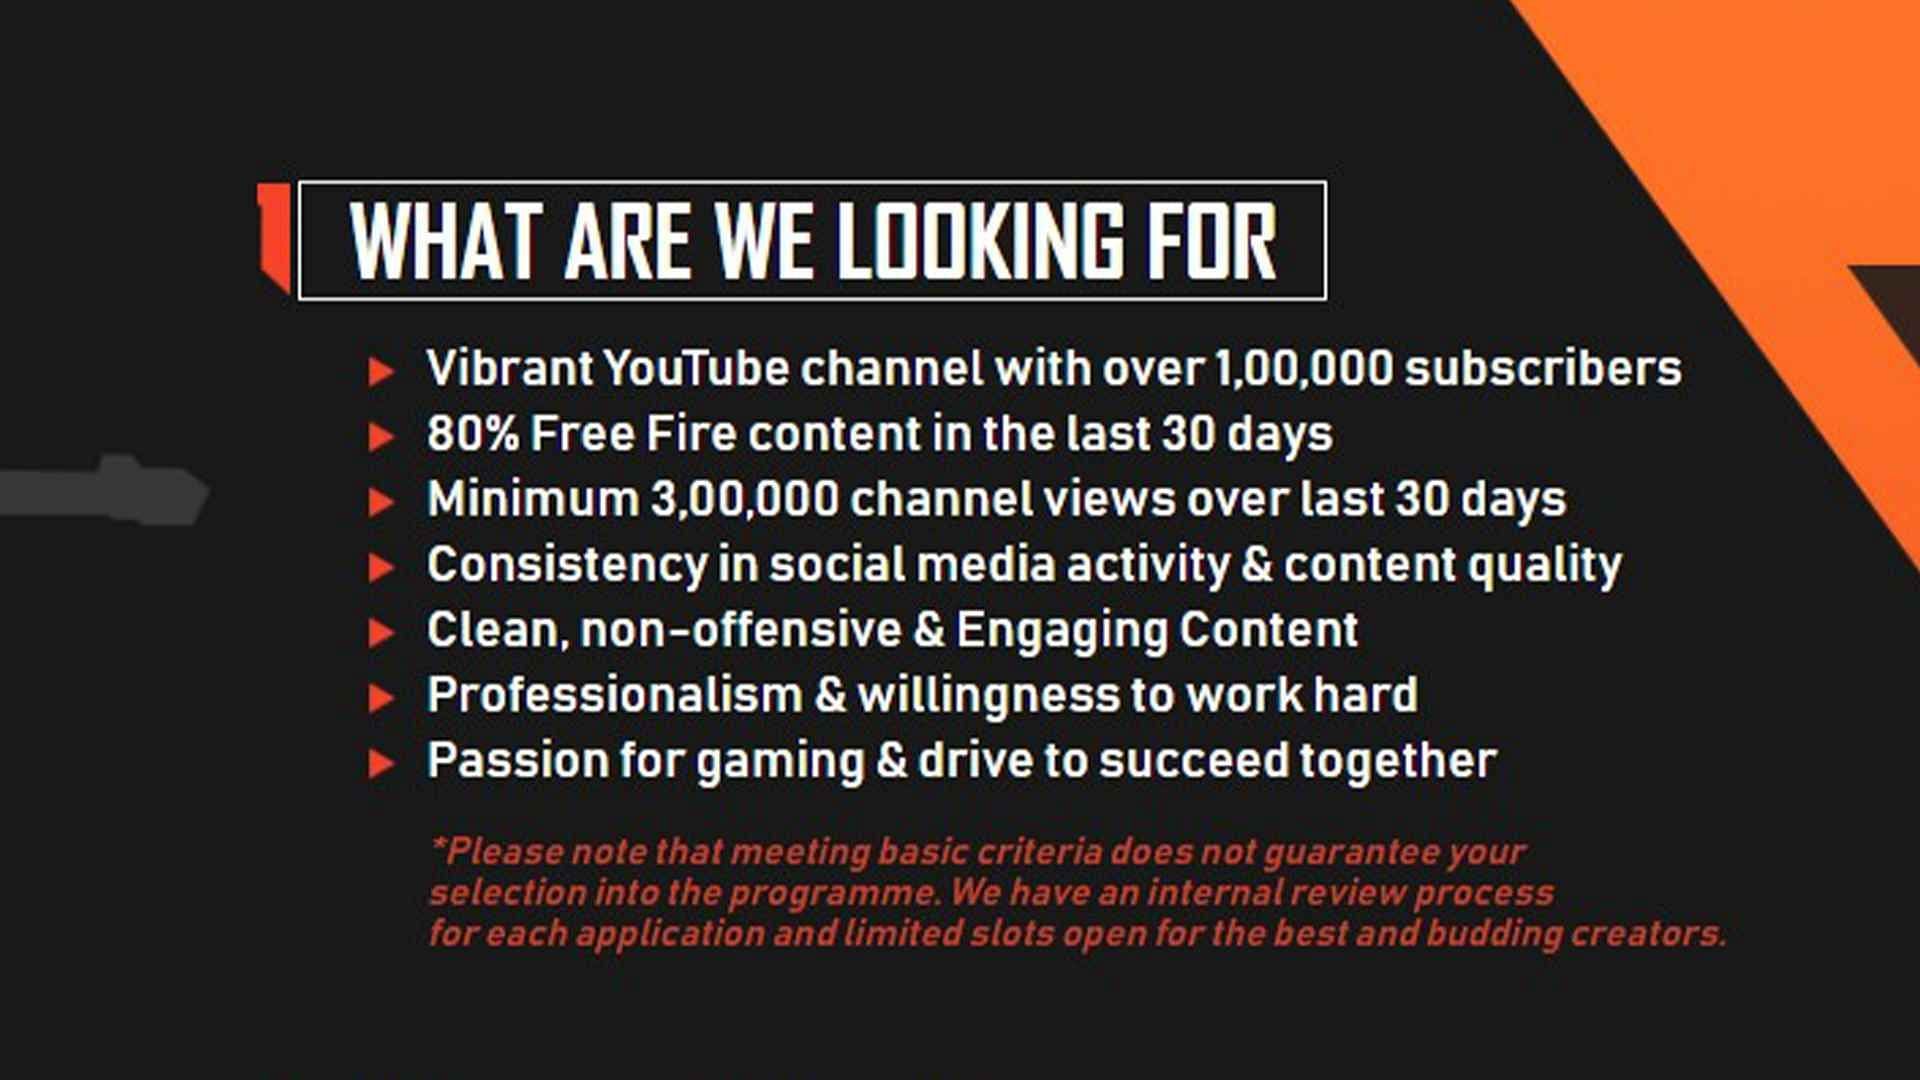 One should comply with these criteria to apply (Image via Garena)